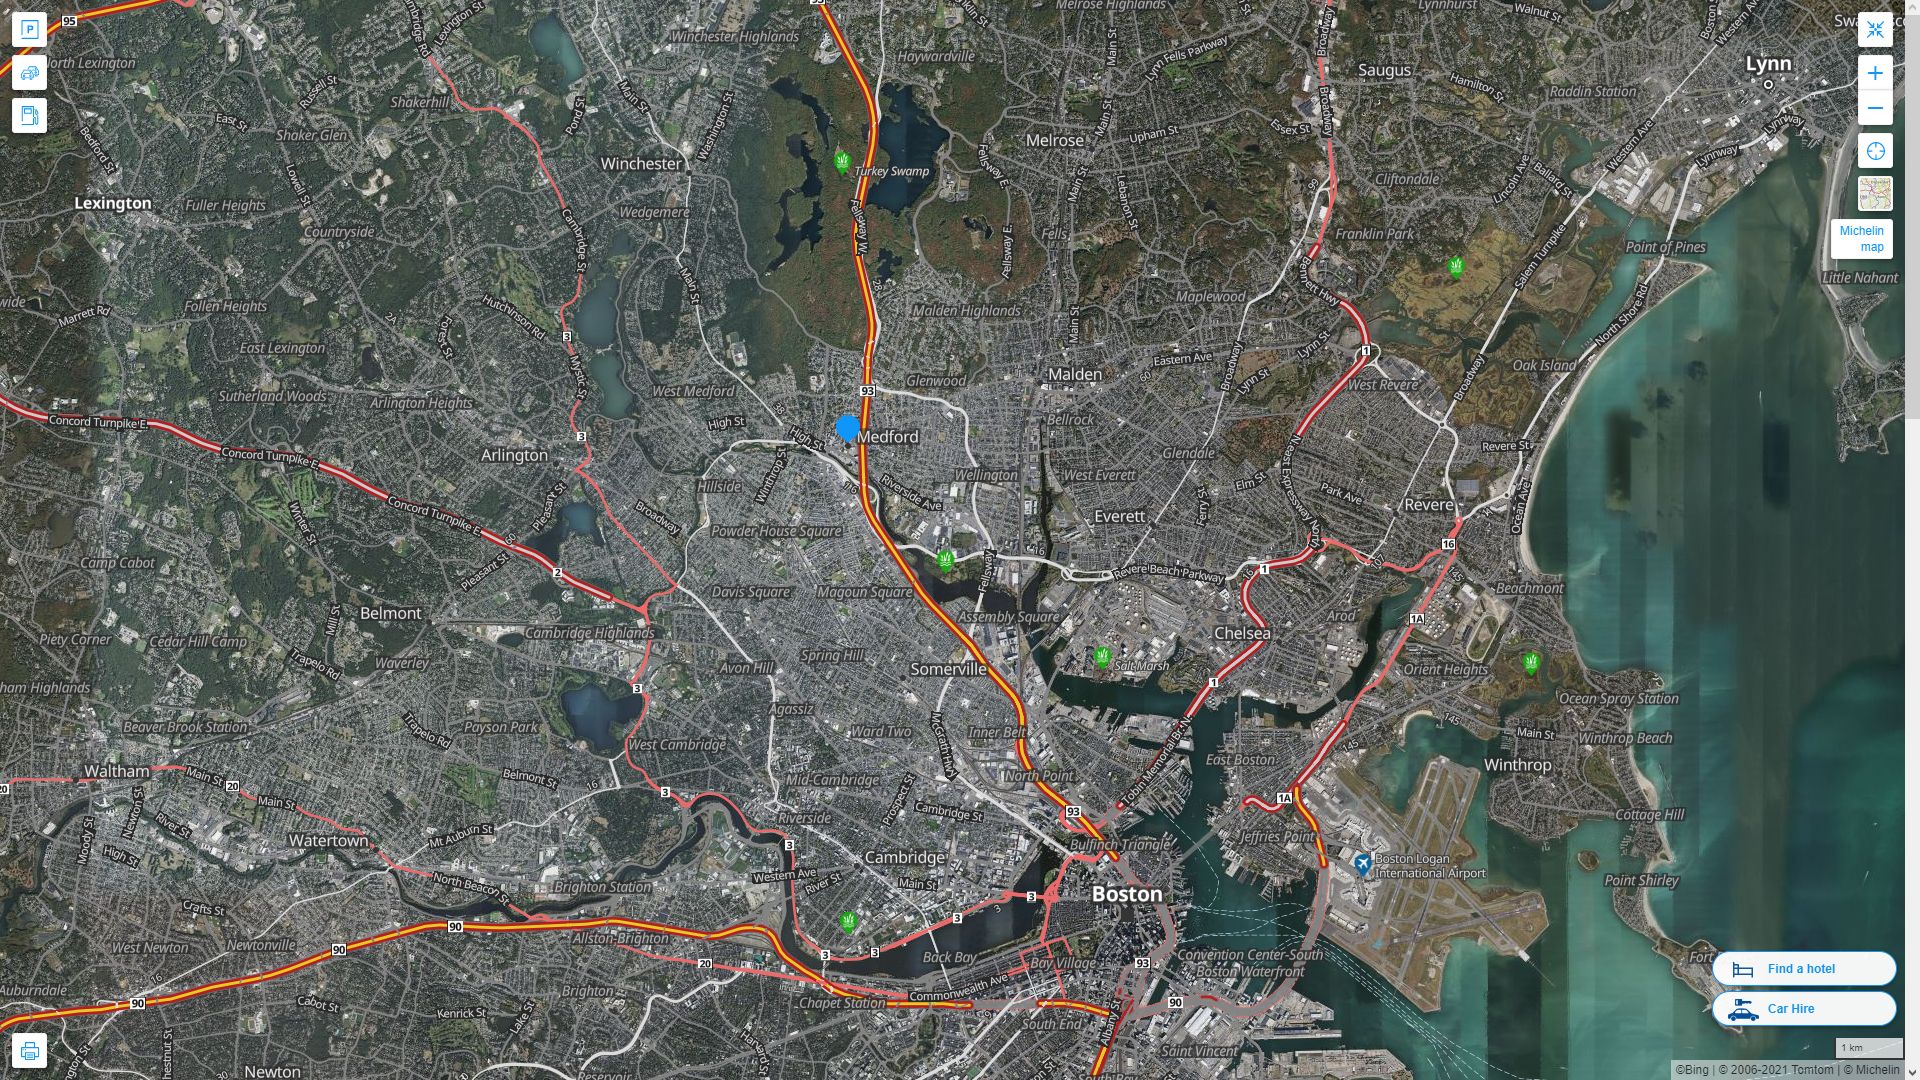 Medford Massachusetts Highway and Road Map with Satellite View